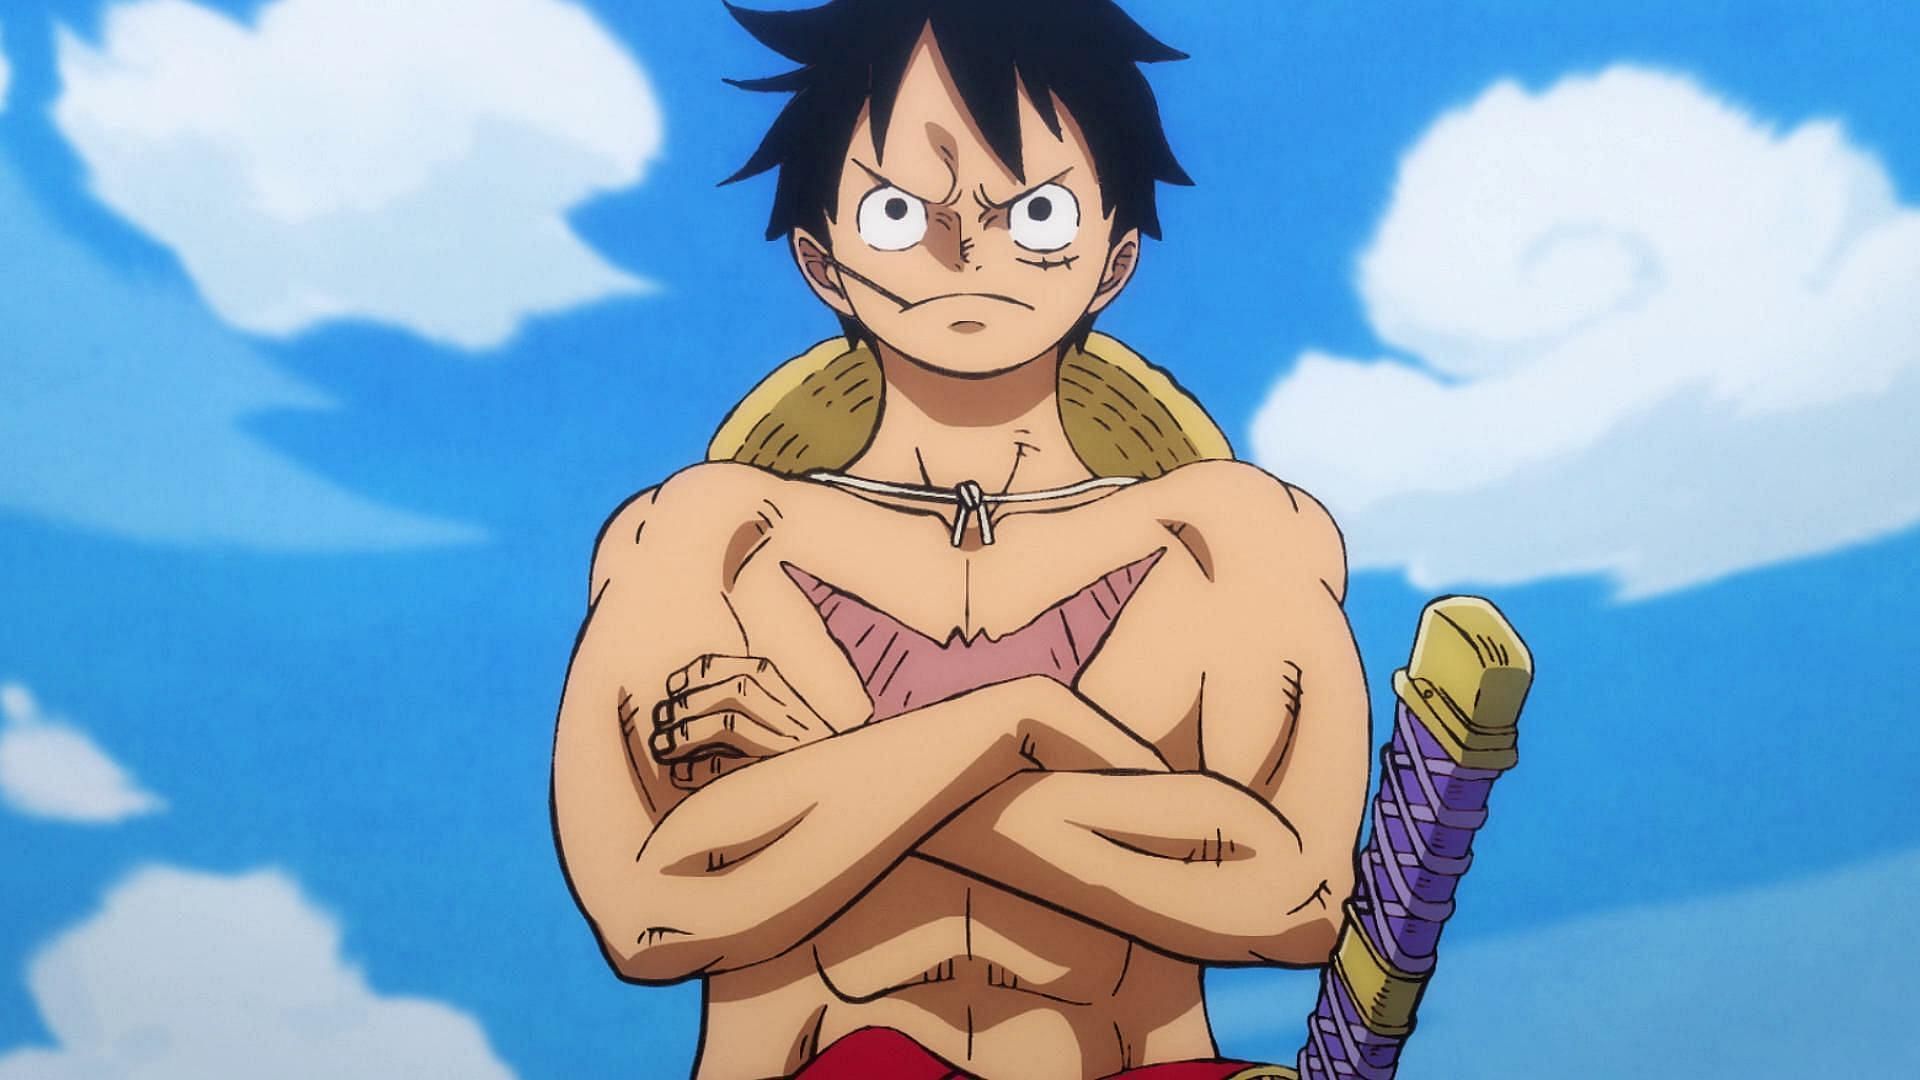 Luffy as seen in the One Piece Wano arc (Image via Toei Animation)